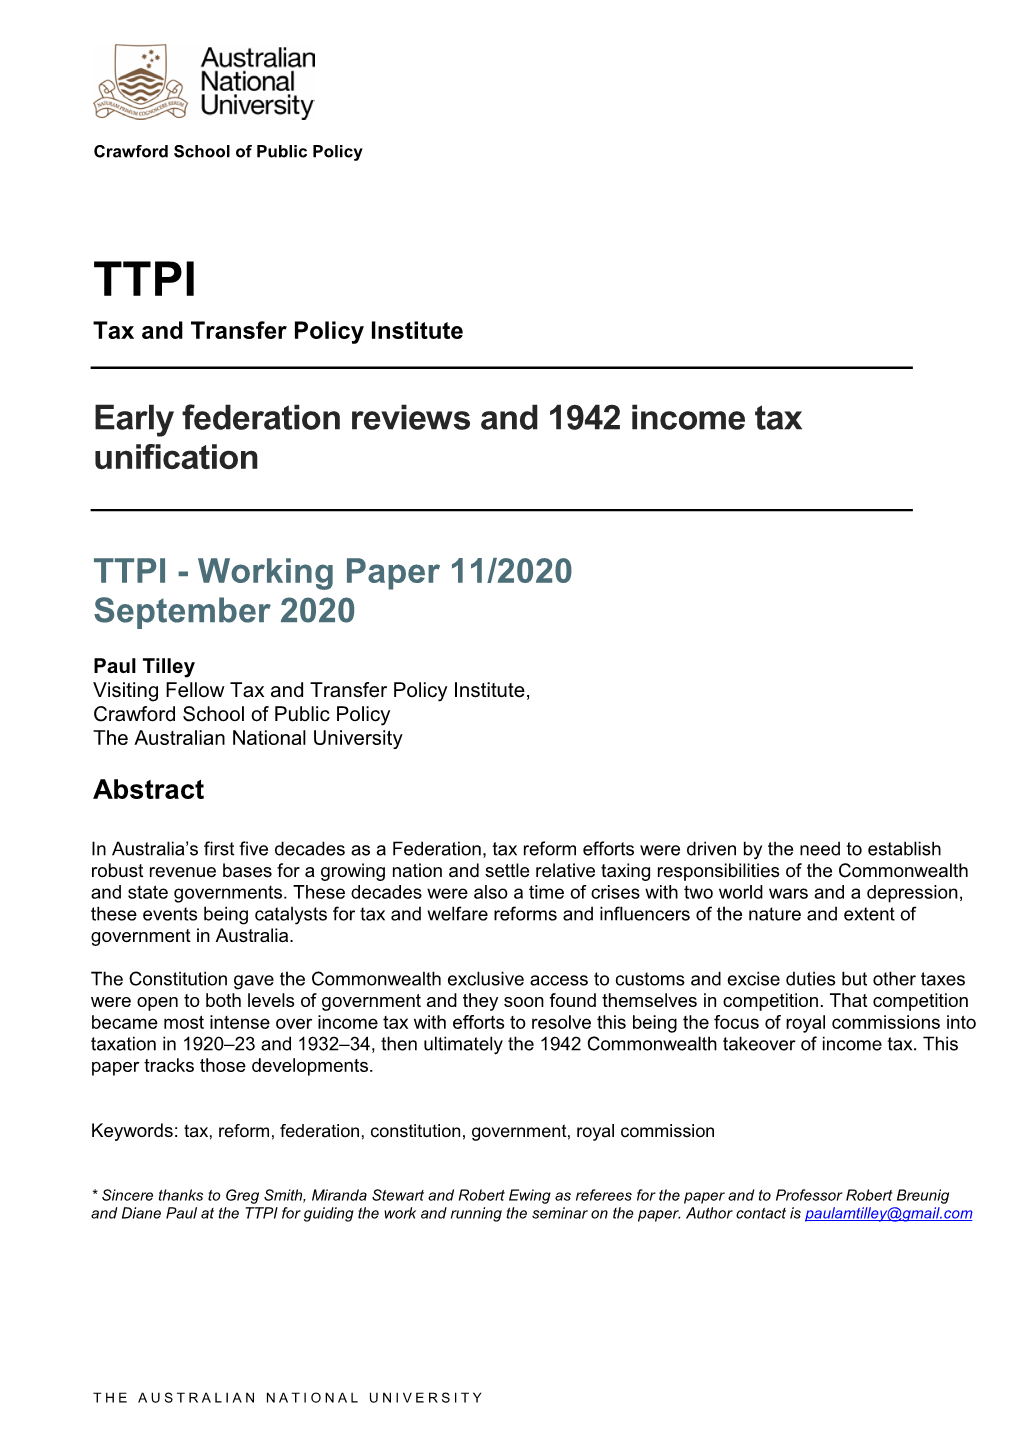 Early Federation Reviews and 1942 Income Tax Unification